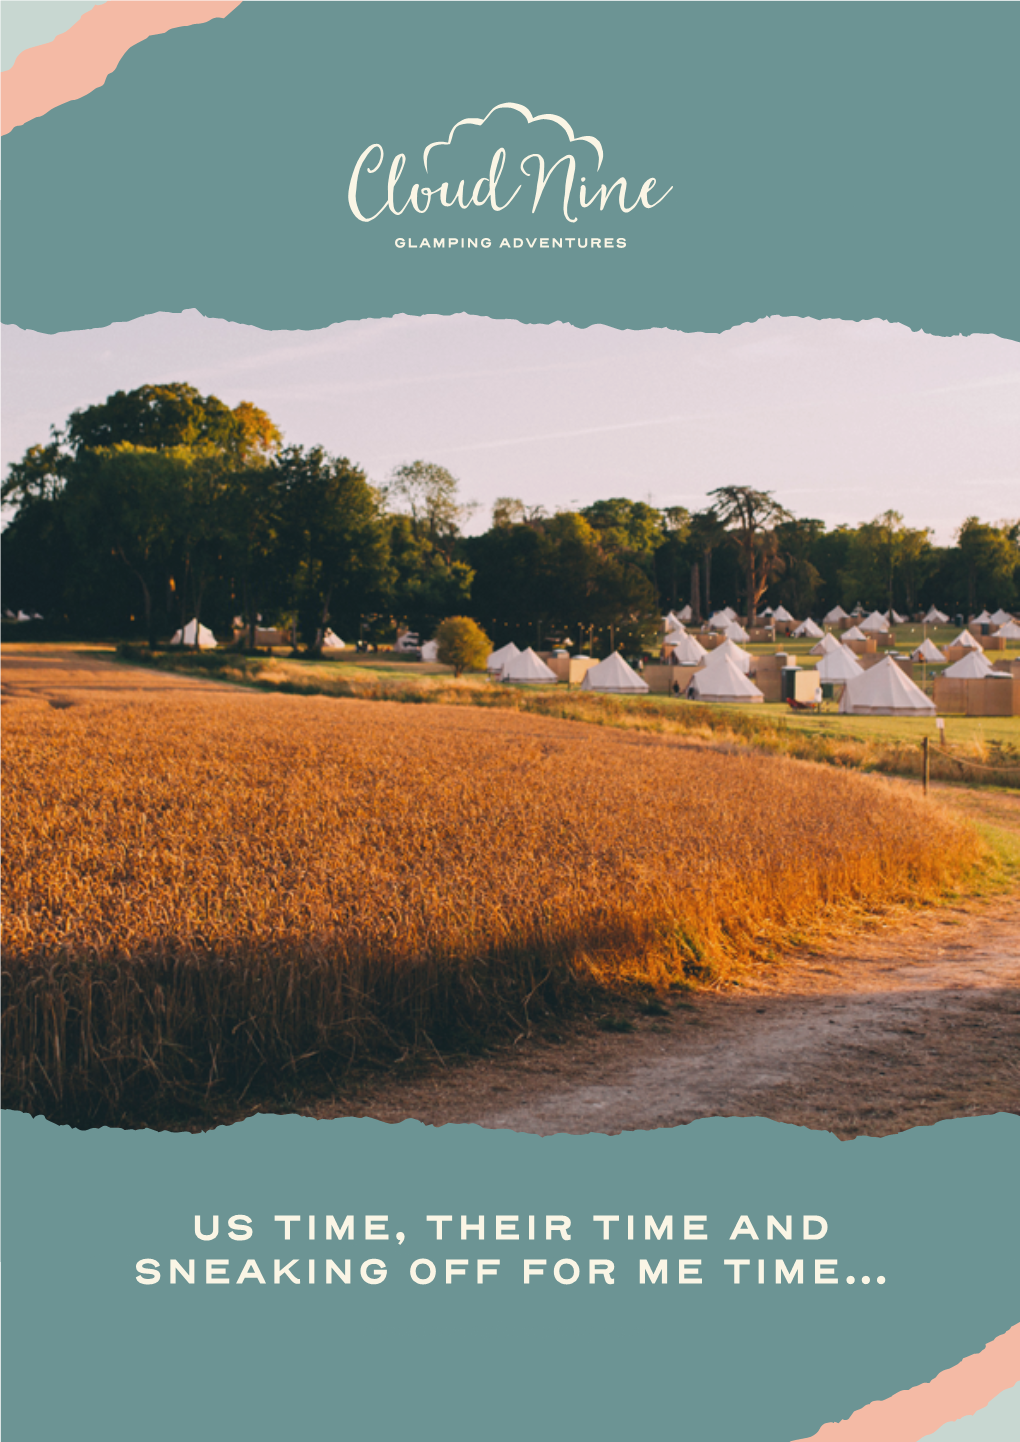 US TIME, THEIR TIME and SNEAKING OFF for ME TIME… Cloudnineglamping.Com “The Most Fun We’Ve Had As a Family and the Best Weekend I’Ve Had with My Kids and Friends